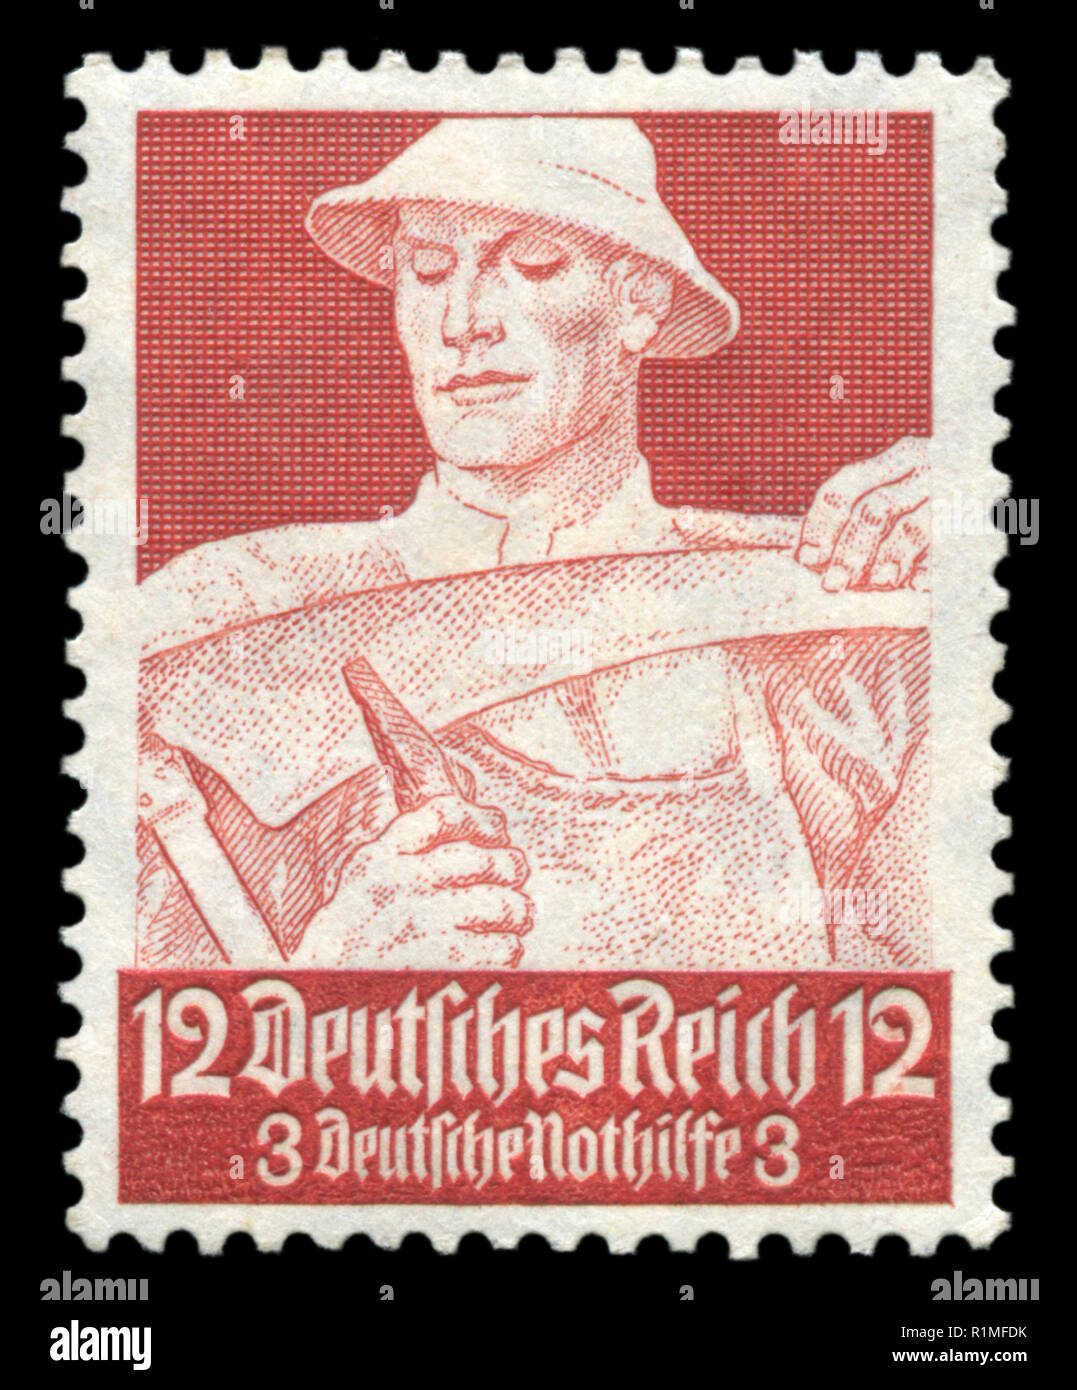 German historical postage stamp: Farmer sharpening his scythe. Emergency assistance Fund. Honourable professions, 1934, Germany, the Third Reich Stock Photo